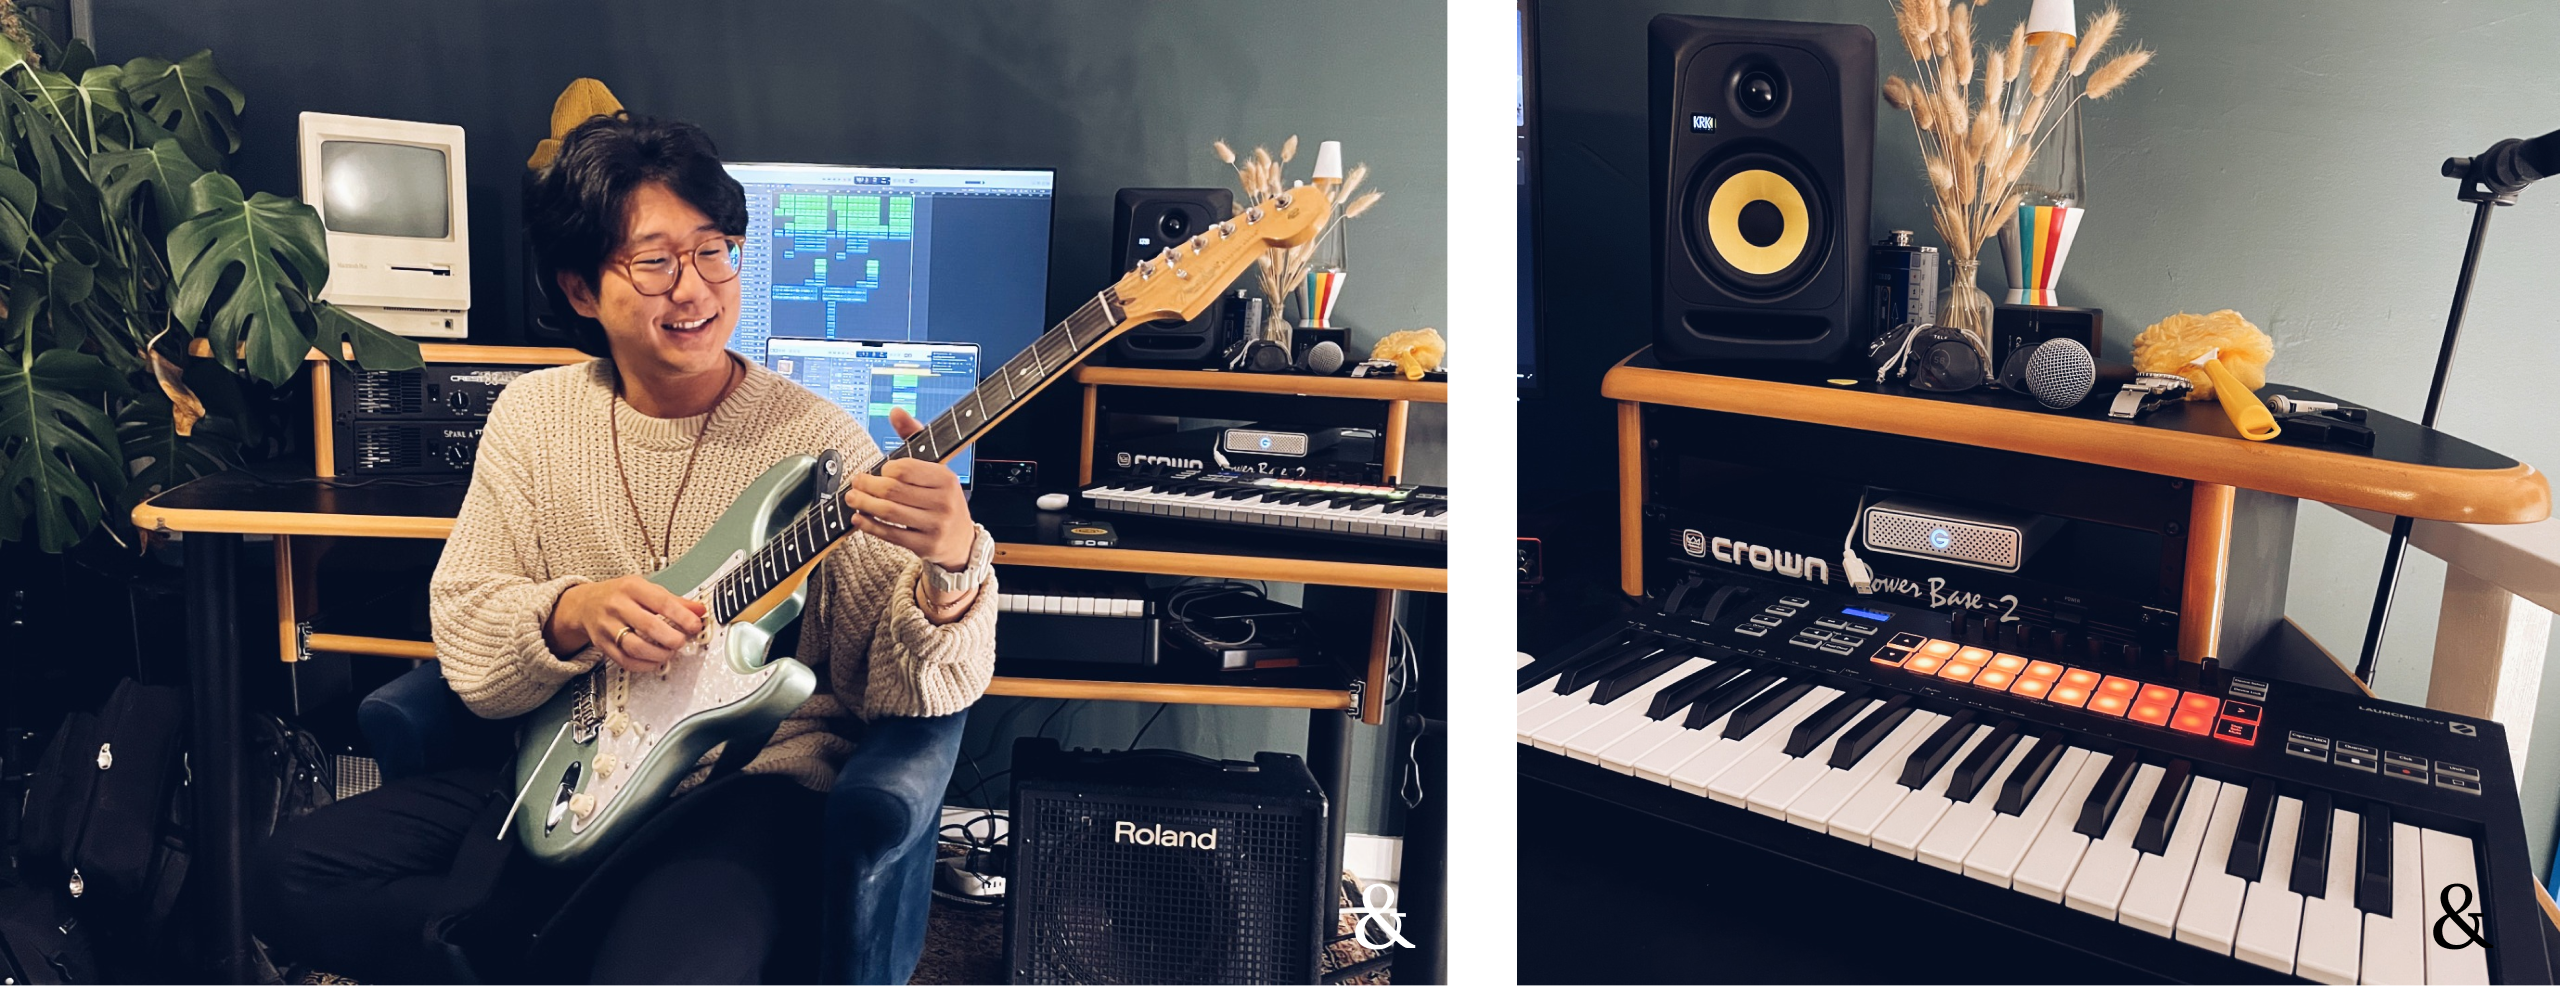 Sam Ray Lee holding his guitar sitting in front of his studio on left photo. Right phot is up close view of his keyboard and speaker.